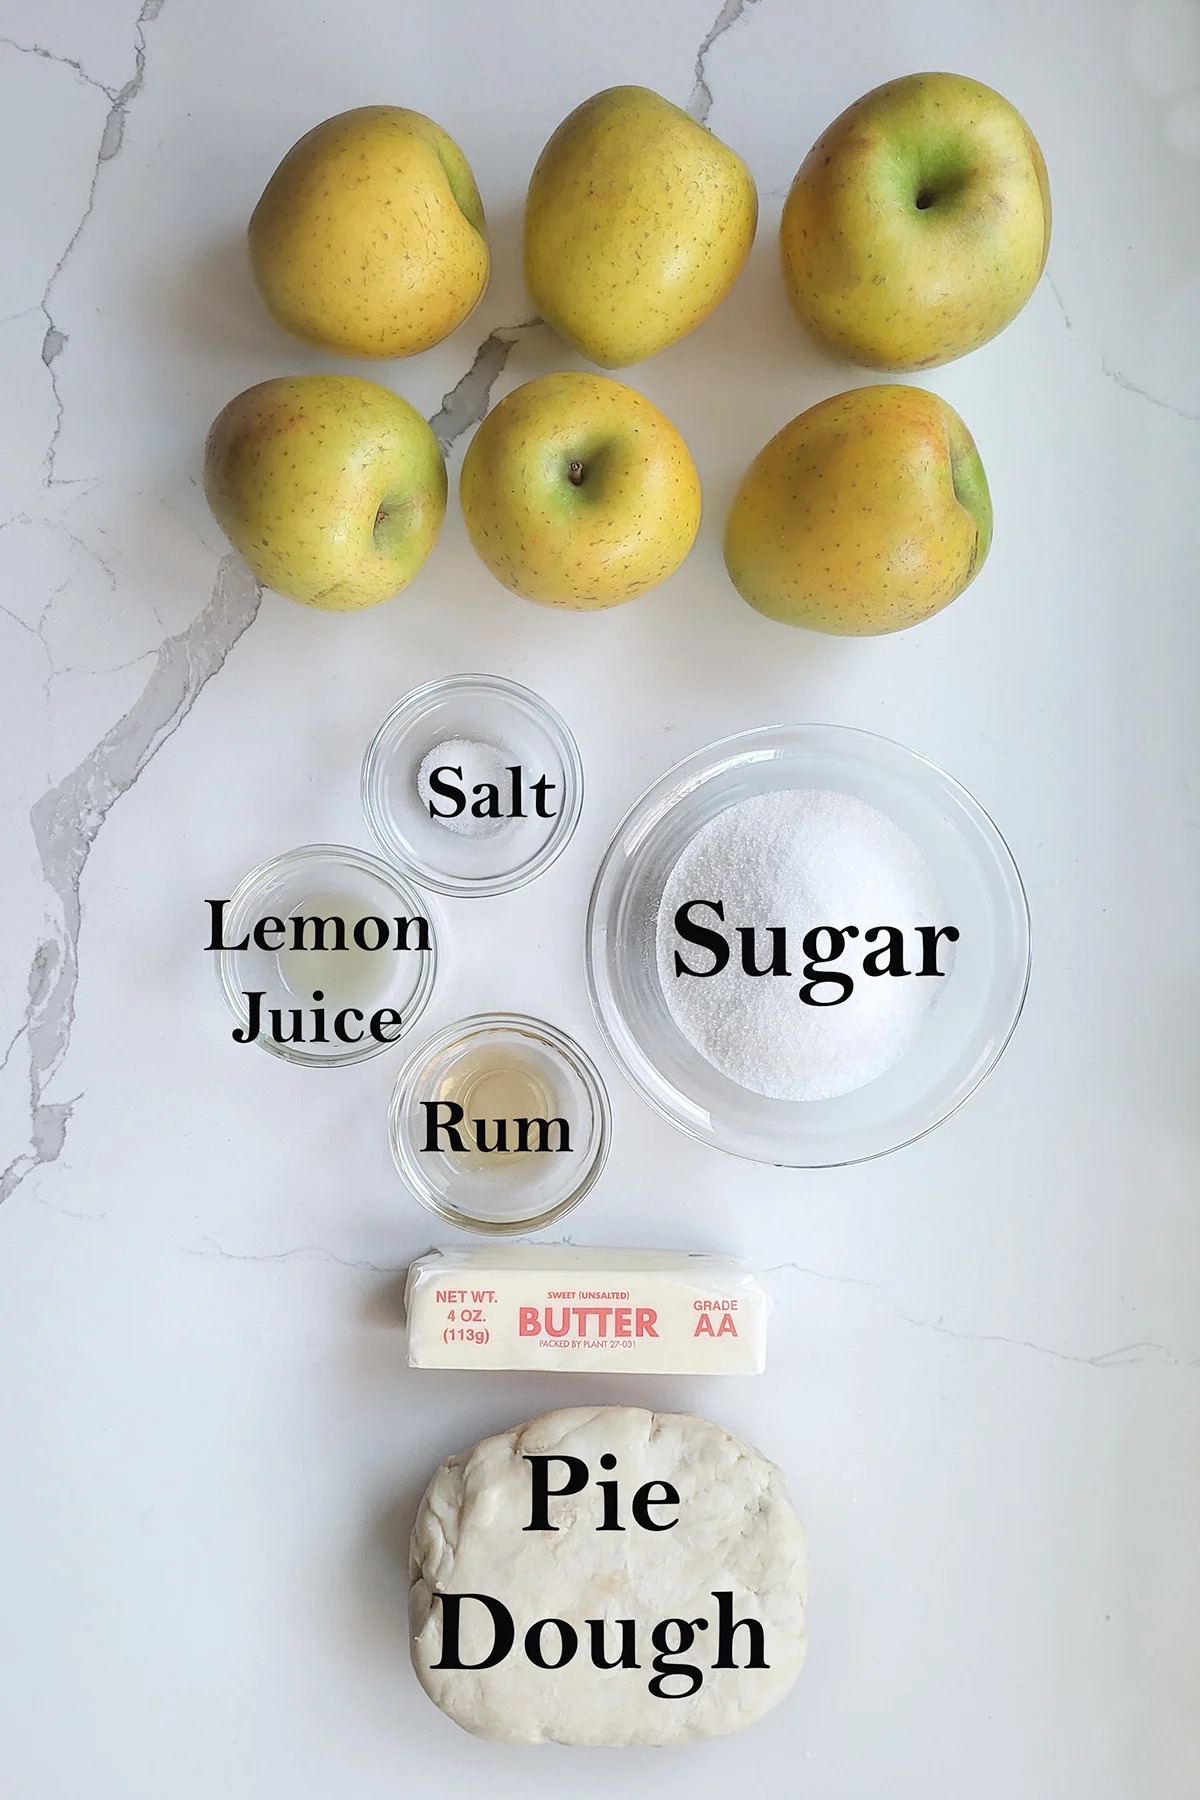 ingredients for apple tarte tatin in glass bowls on a white surface.